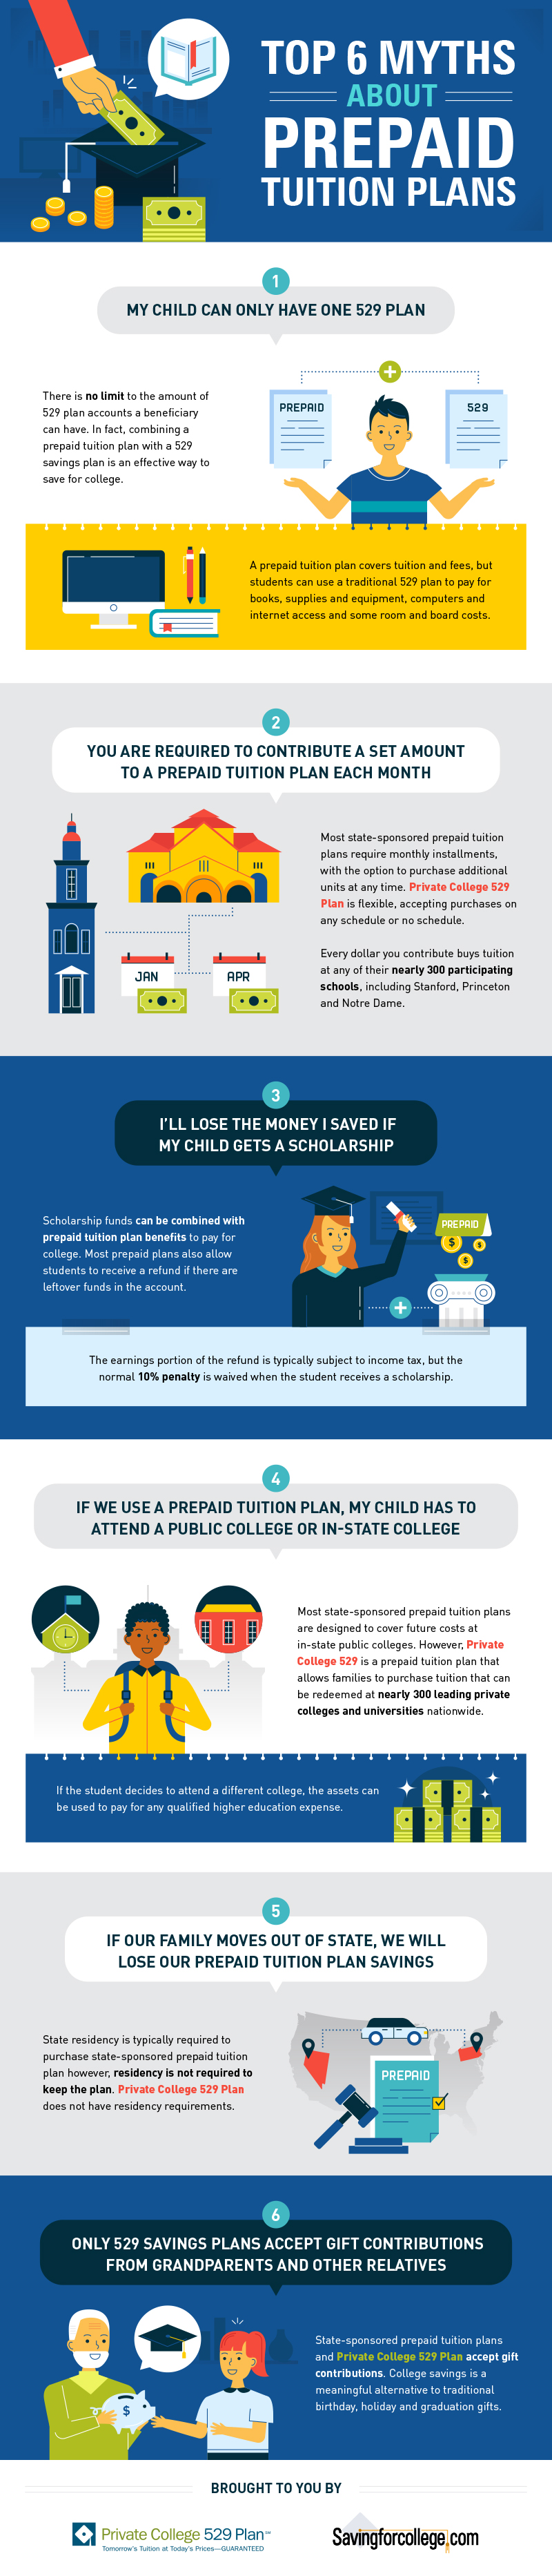 Top 6 myths about prepaid tuition plans Infographic